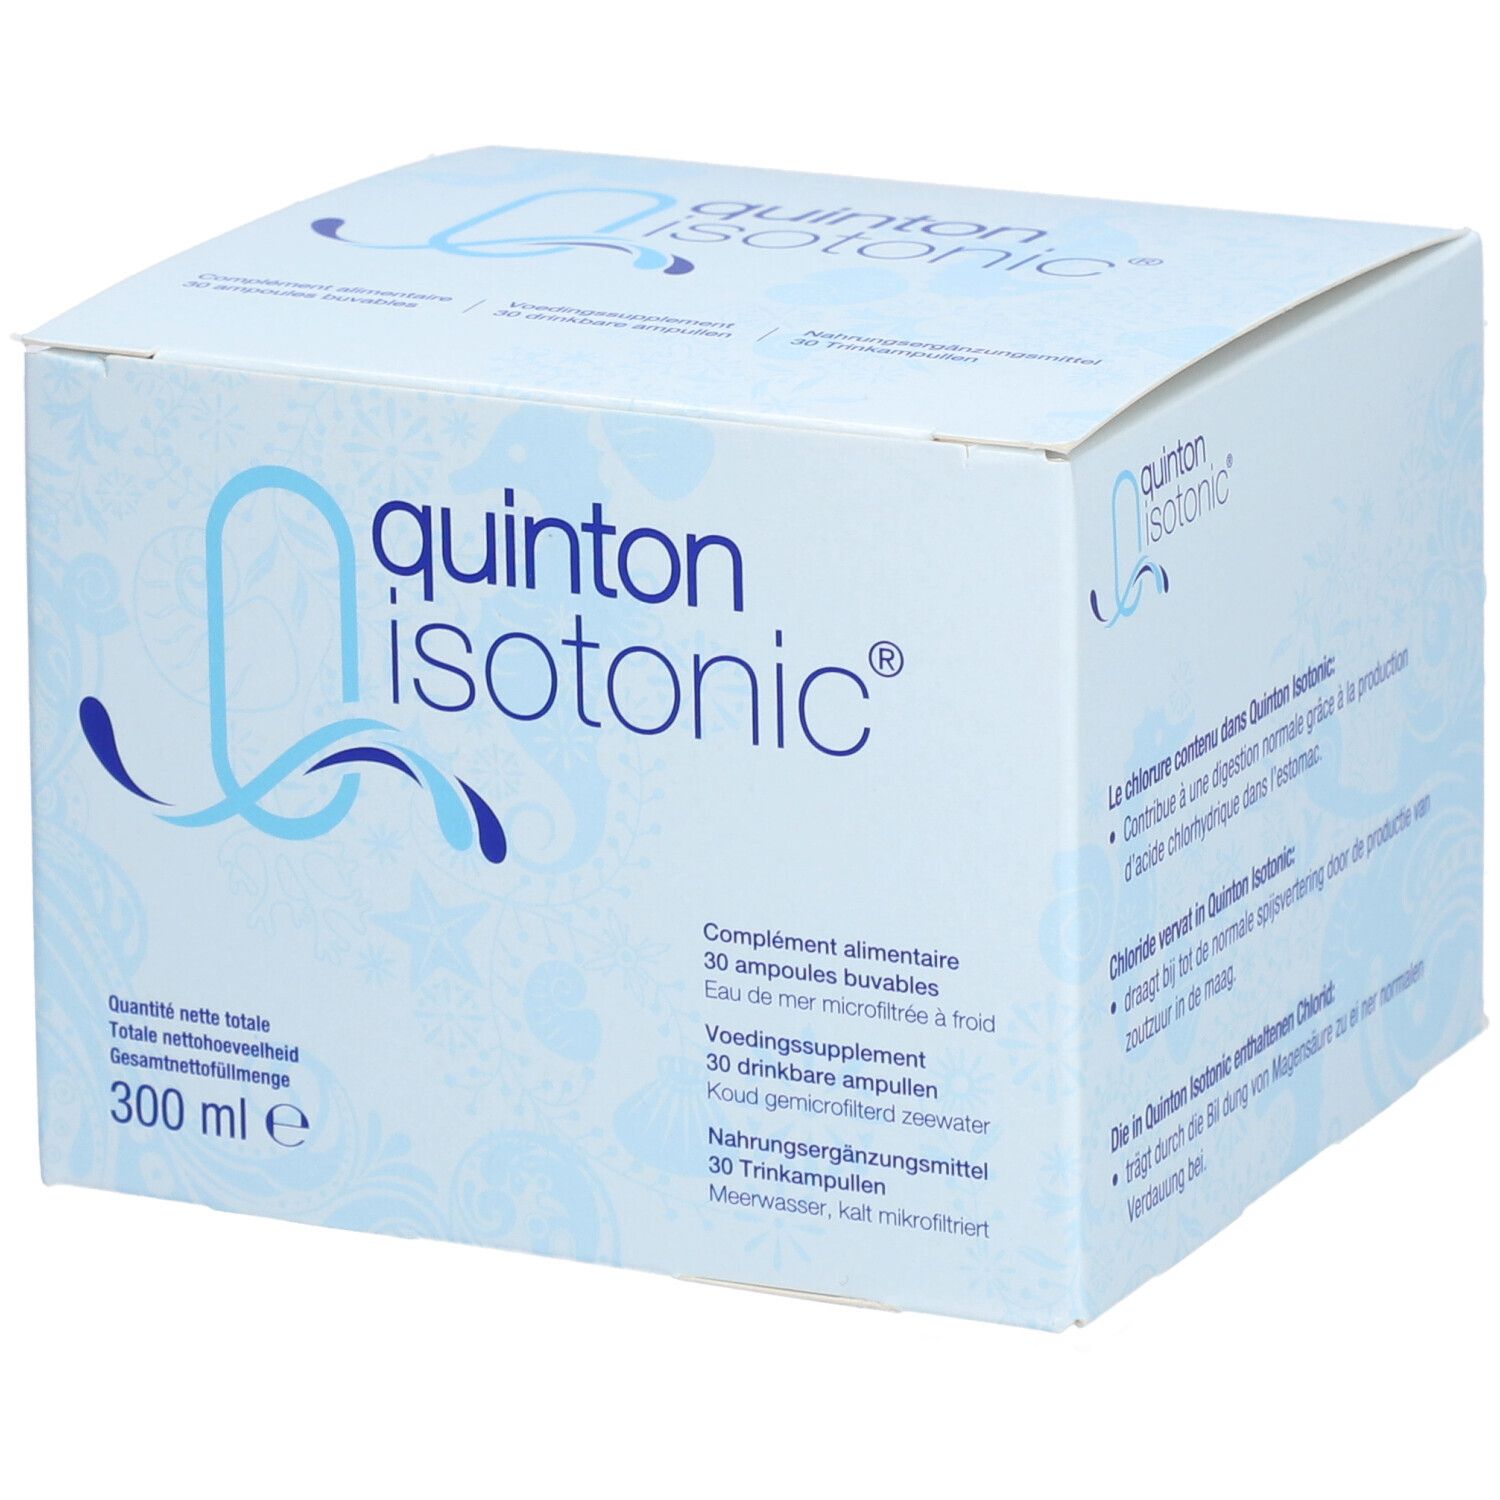 Image of Quinton isotonic®